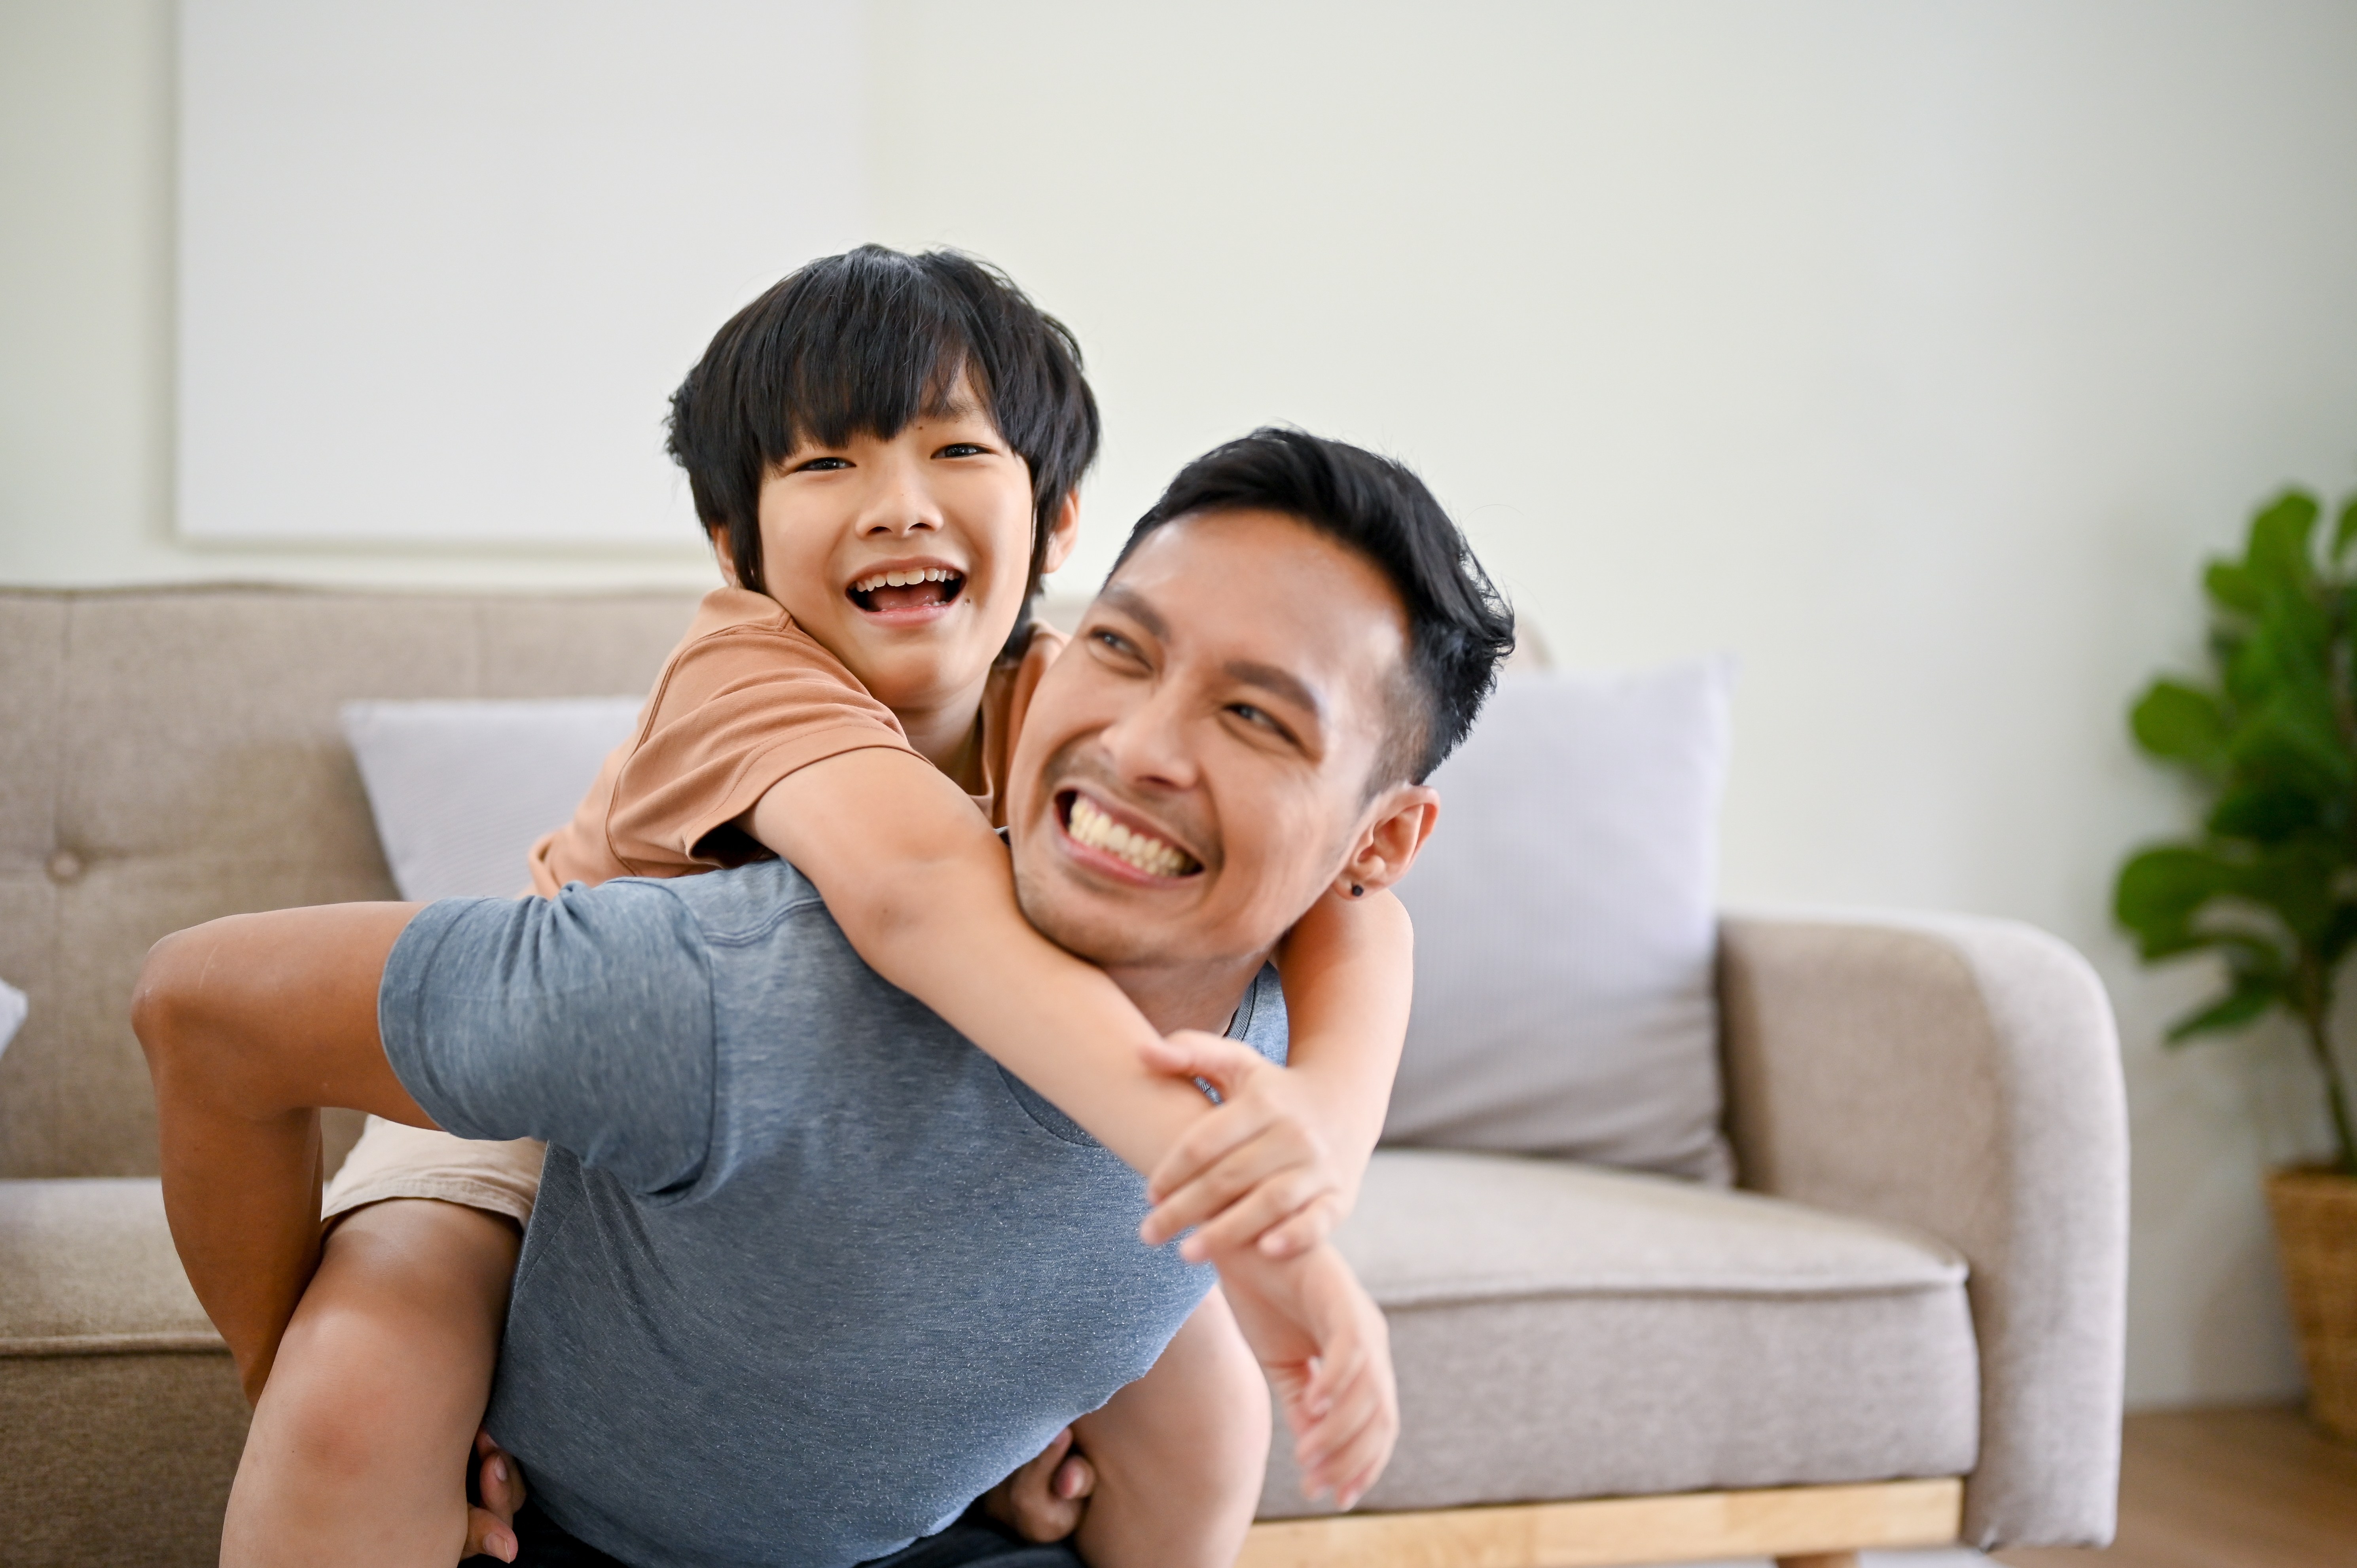 Asian son on his father's back, smiling | Source: Shutterstock